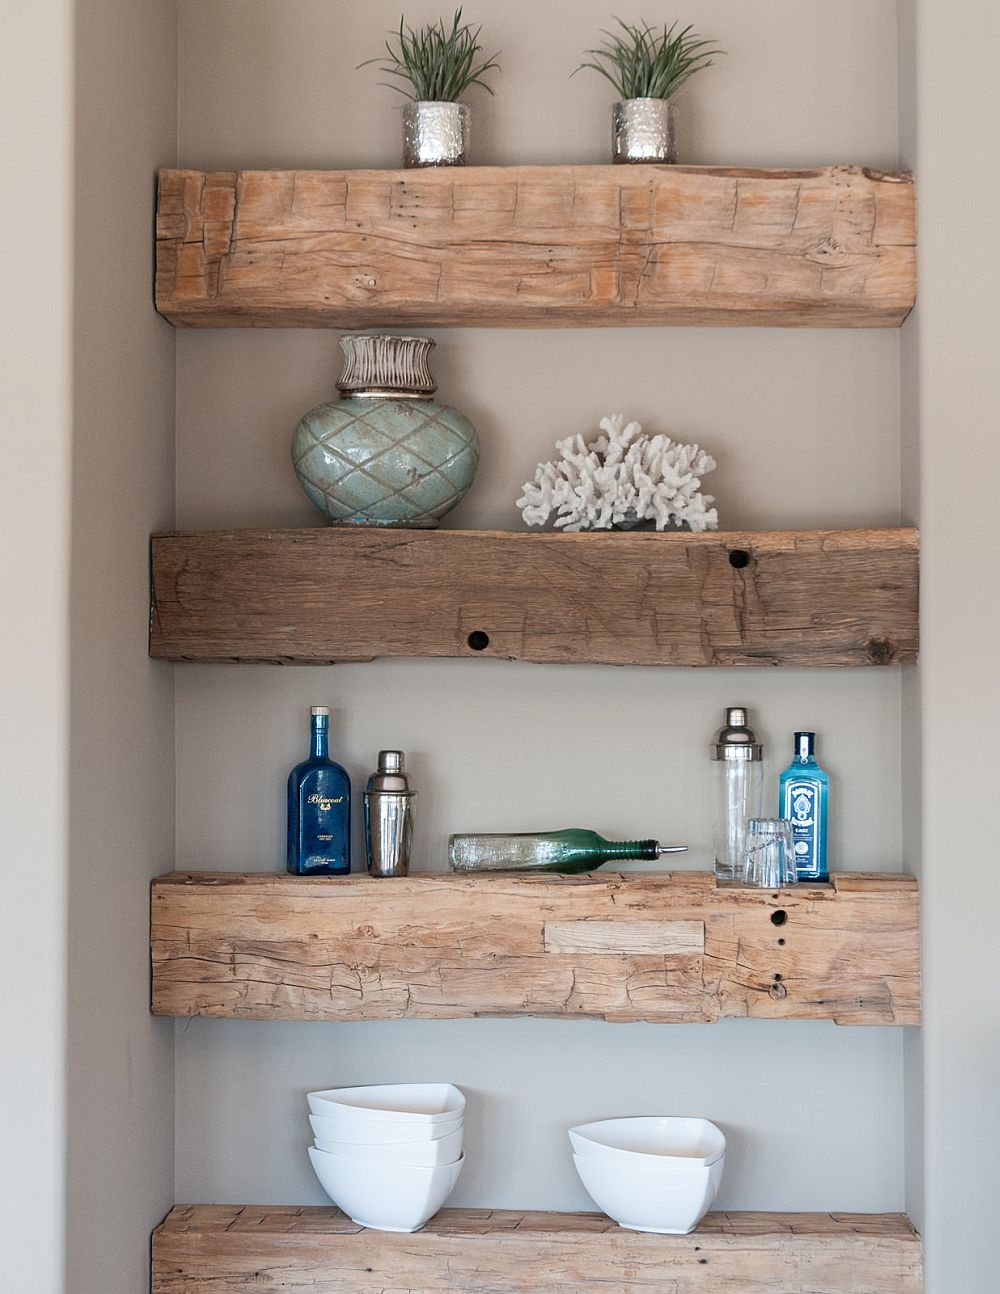 Turn-the-small-niche-in-the-kitchen-into-an-attractive-display-with-DIY-shelves